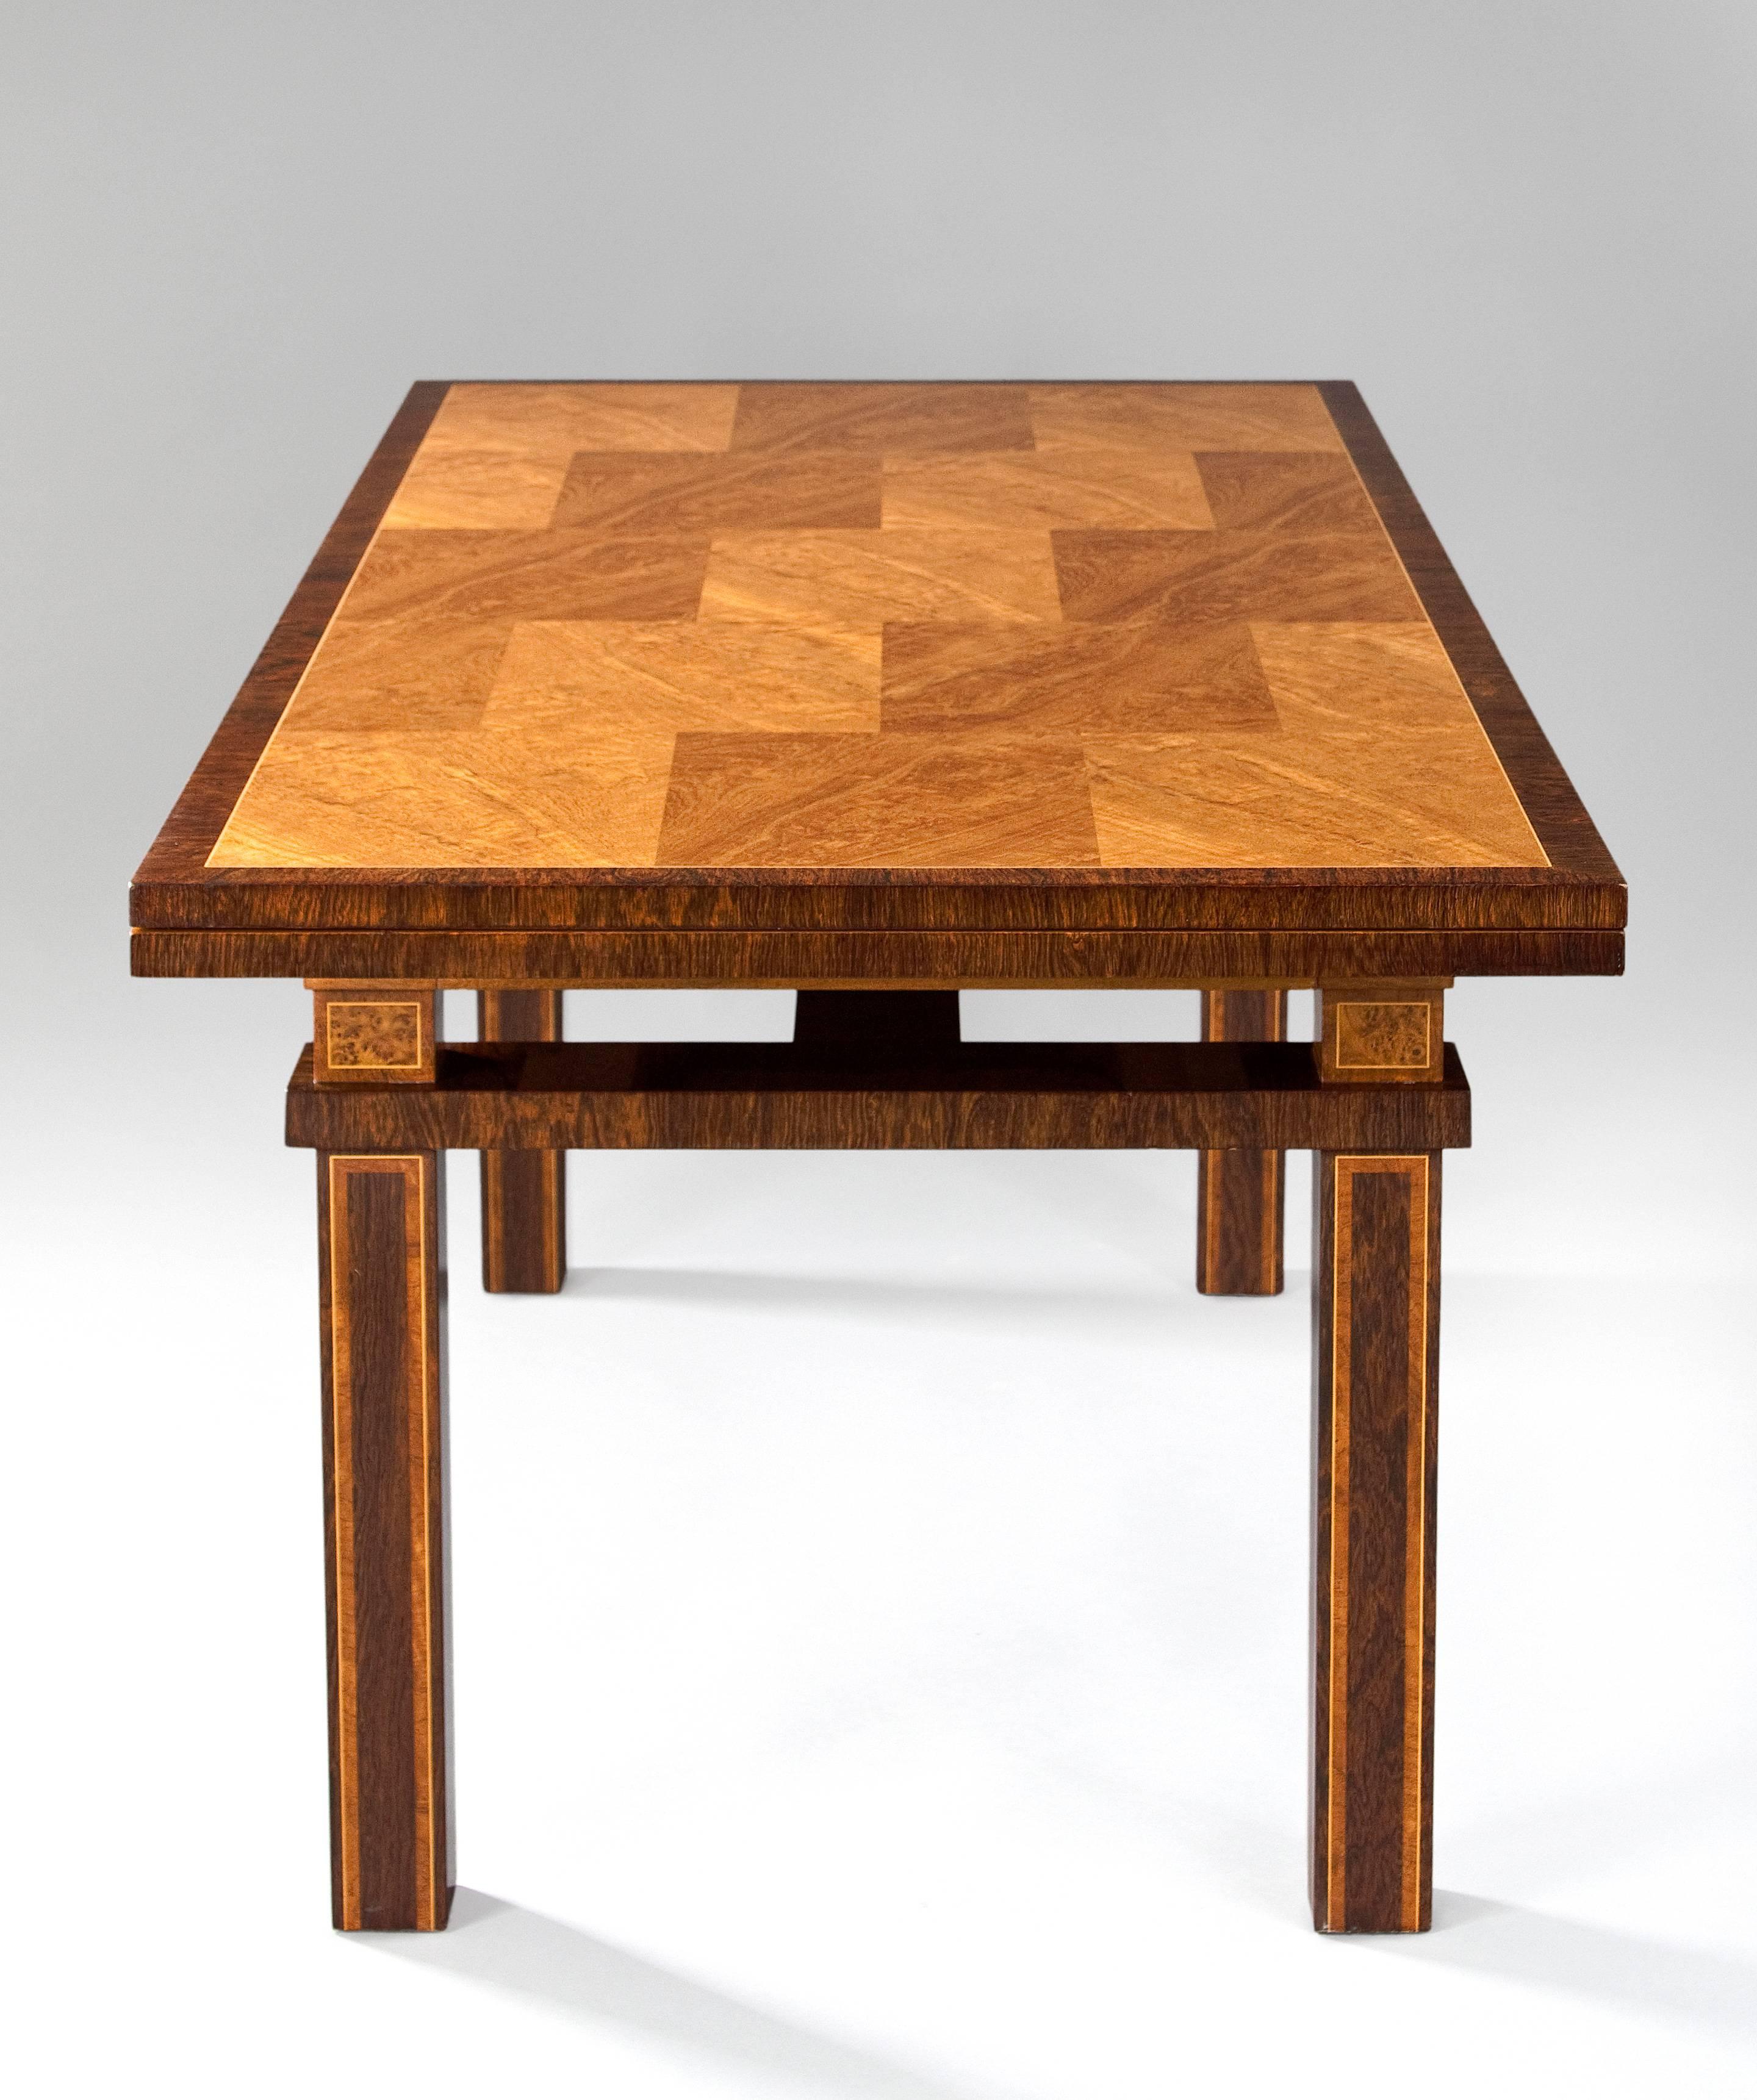 Carl Malmsten Swedish Grace Period Rosewood and Thuya Extendable Dining Table
The rectangular top composed of rectangular panels, with two 25.5